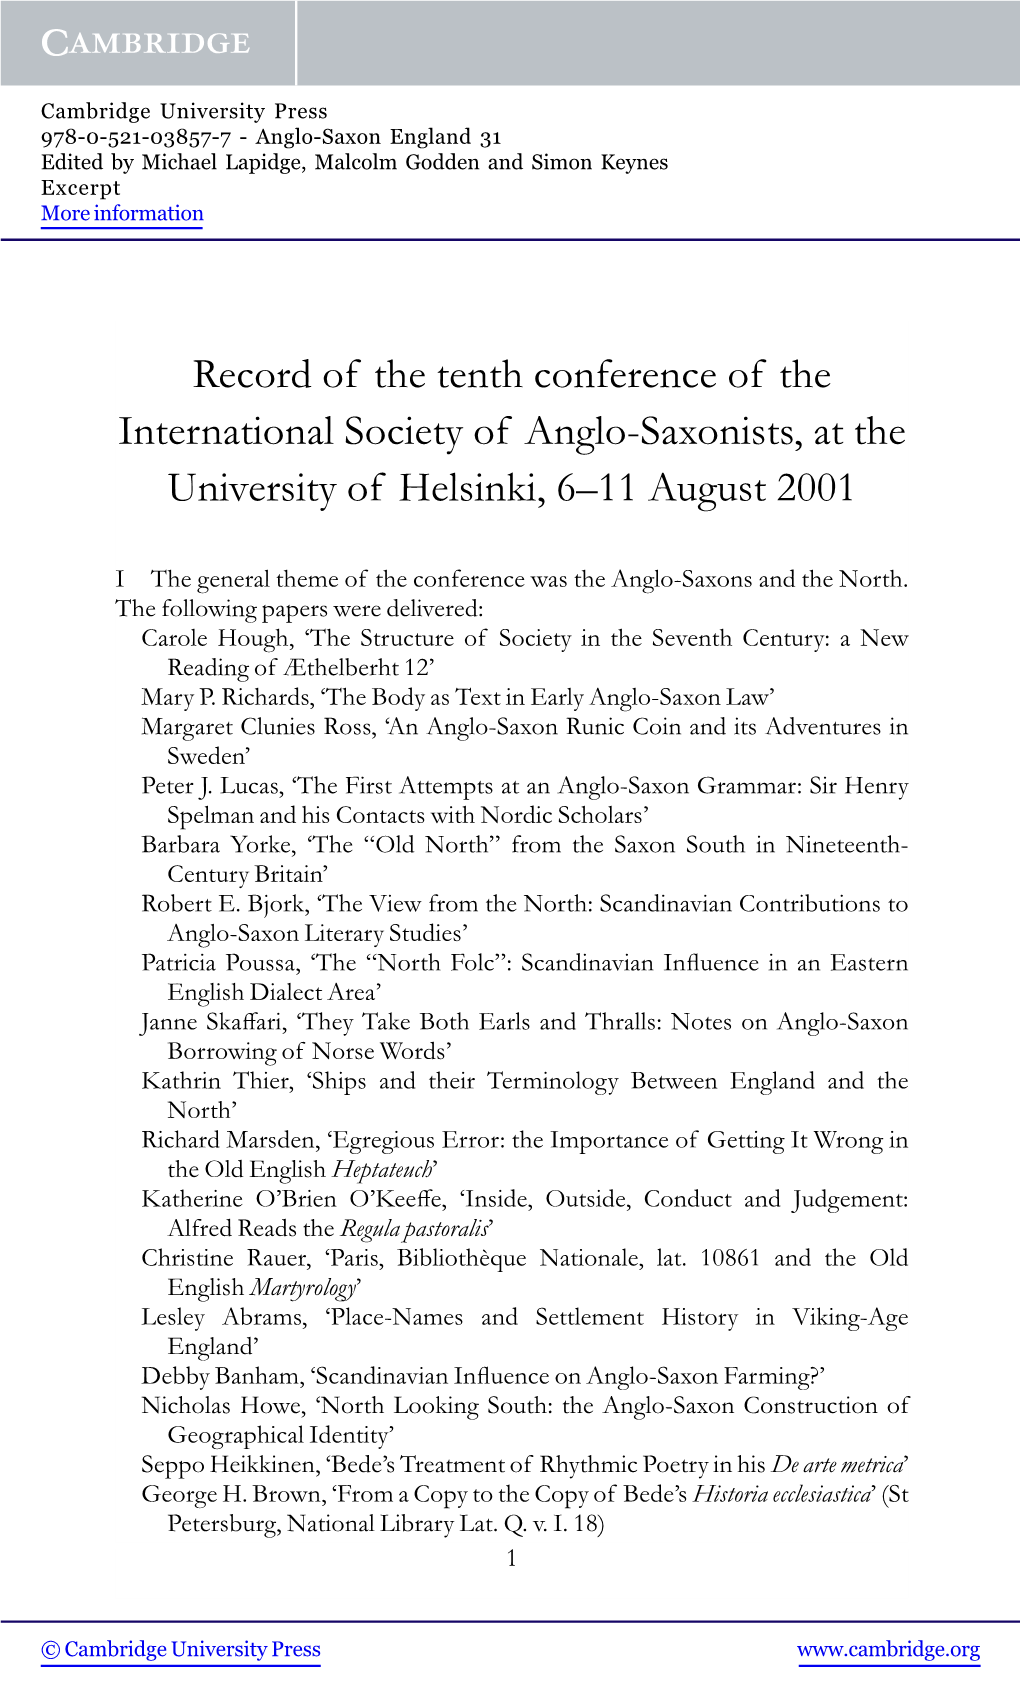 Record of the Tenth Conference of the International Society of Anglo-Saxonists, at the University of Helsinki, 6–11 August 2001